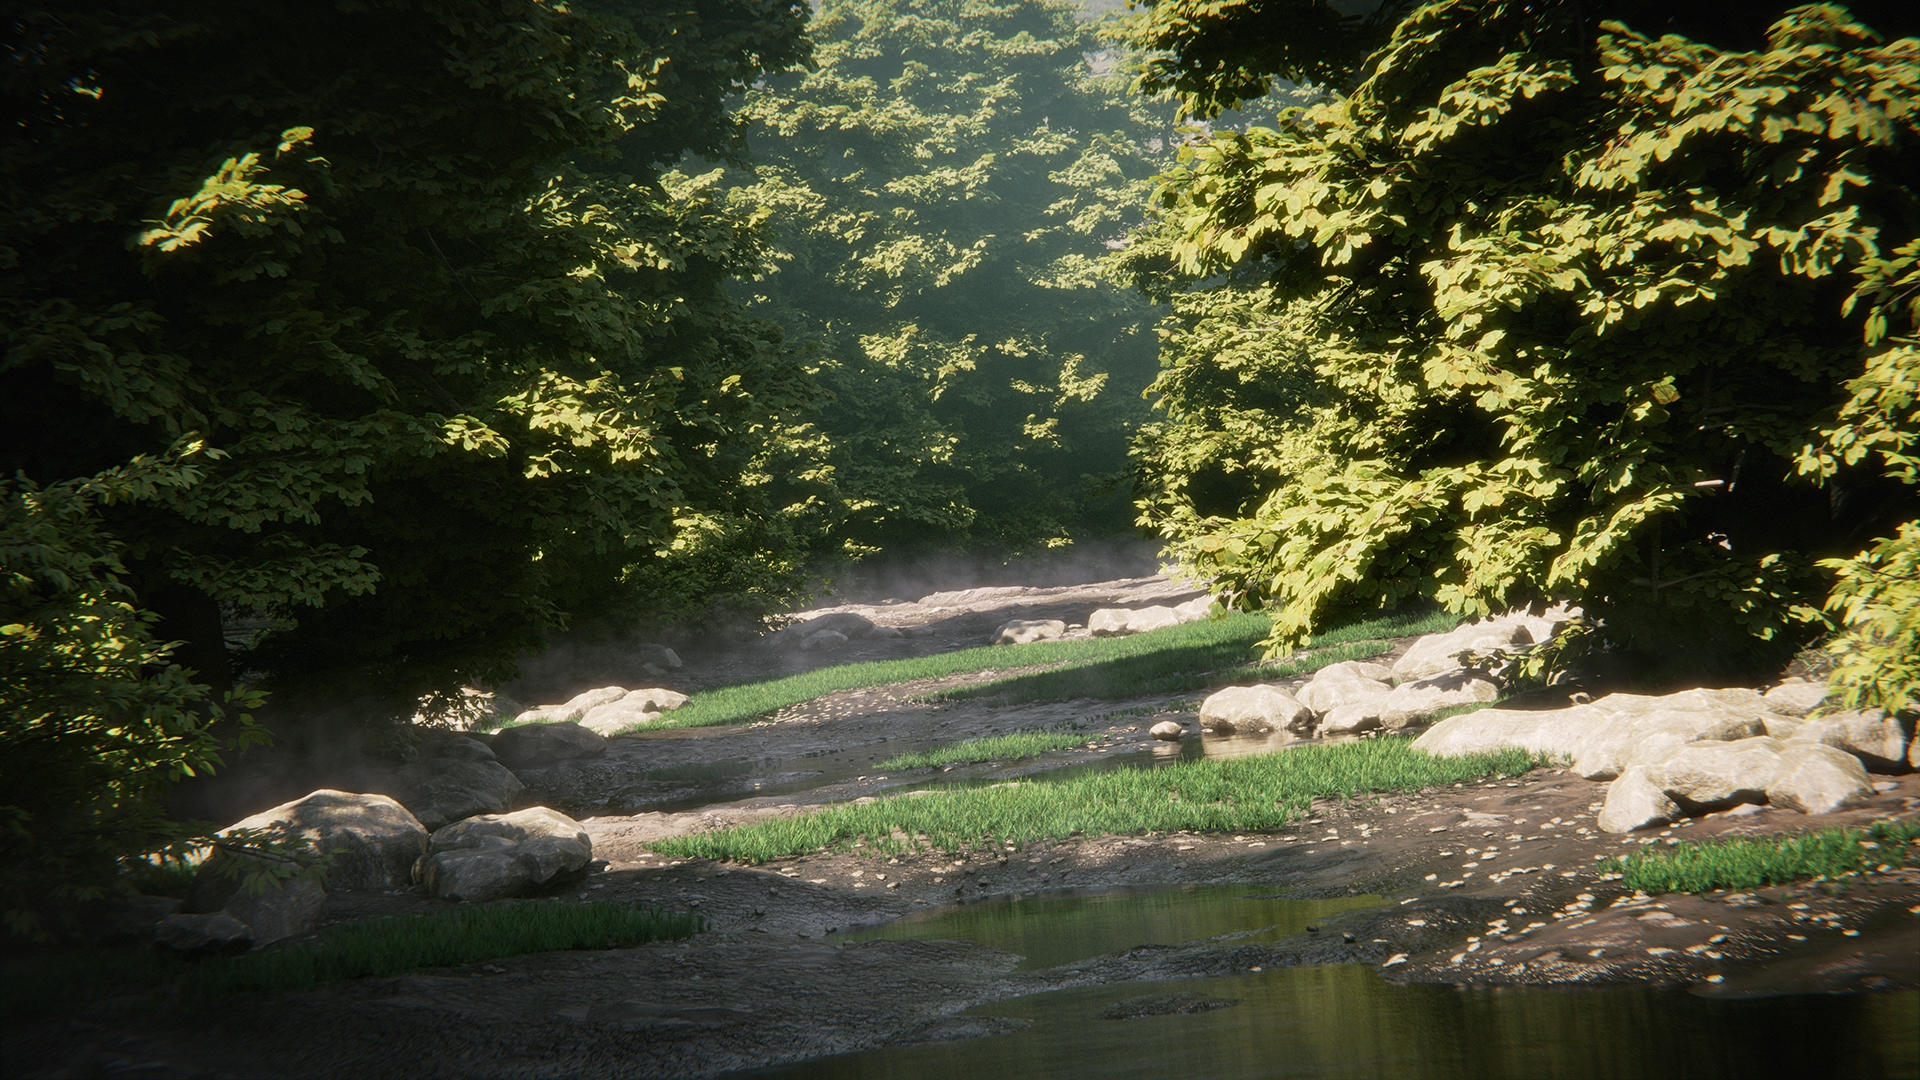 Nature rendering inspired by Ross CG Geeks Tutorials - Finished - Blender Artists Community